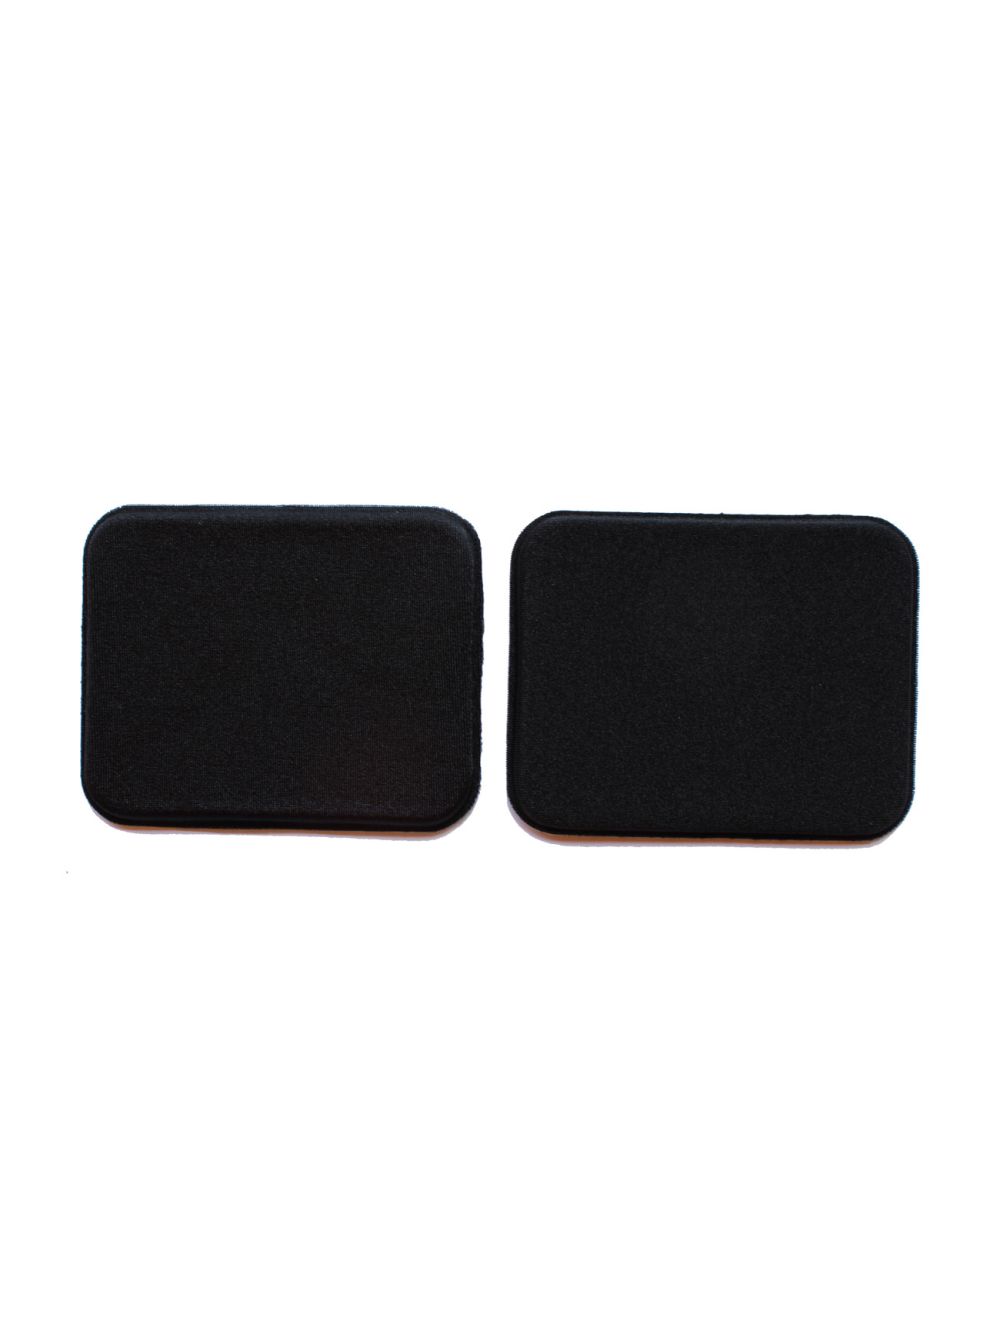 Replacement Palm Pads - Black for Kinesis Advantage Contoured Keyboard